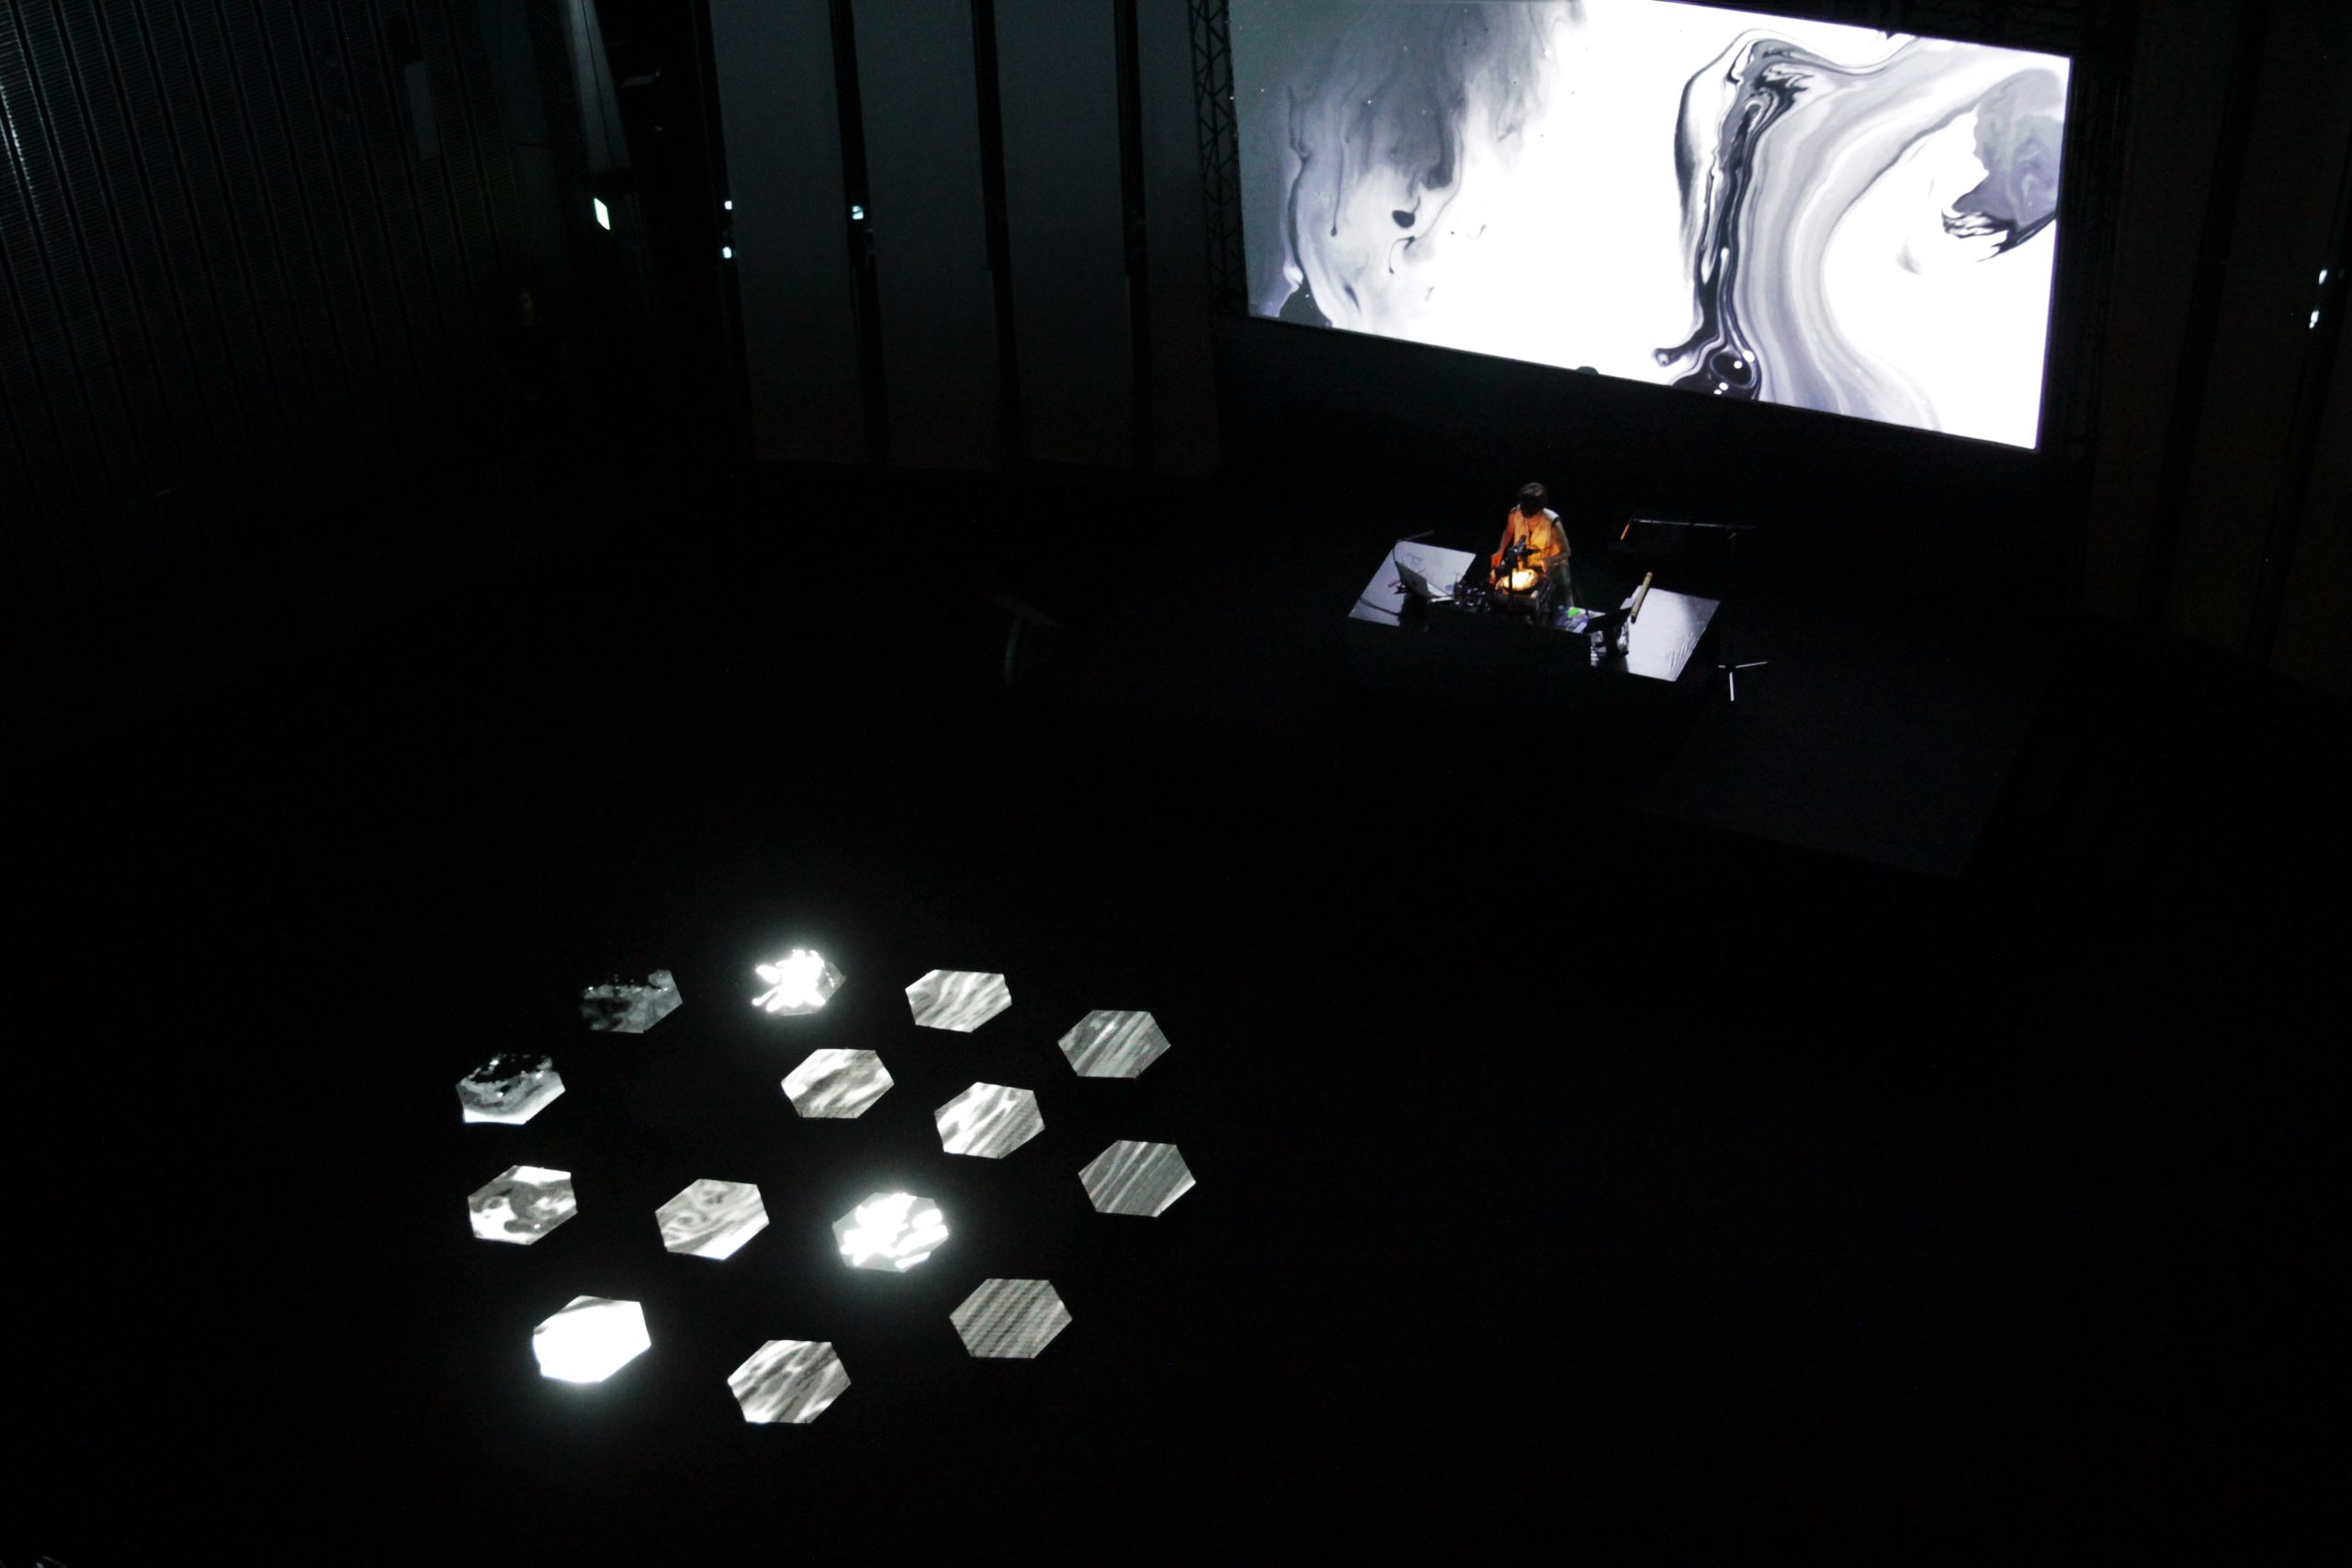 Ars Electronica Futurelab presents Swarm Arena collaborating with NTT, in Tokyo